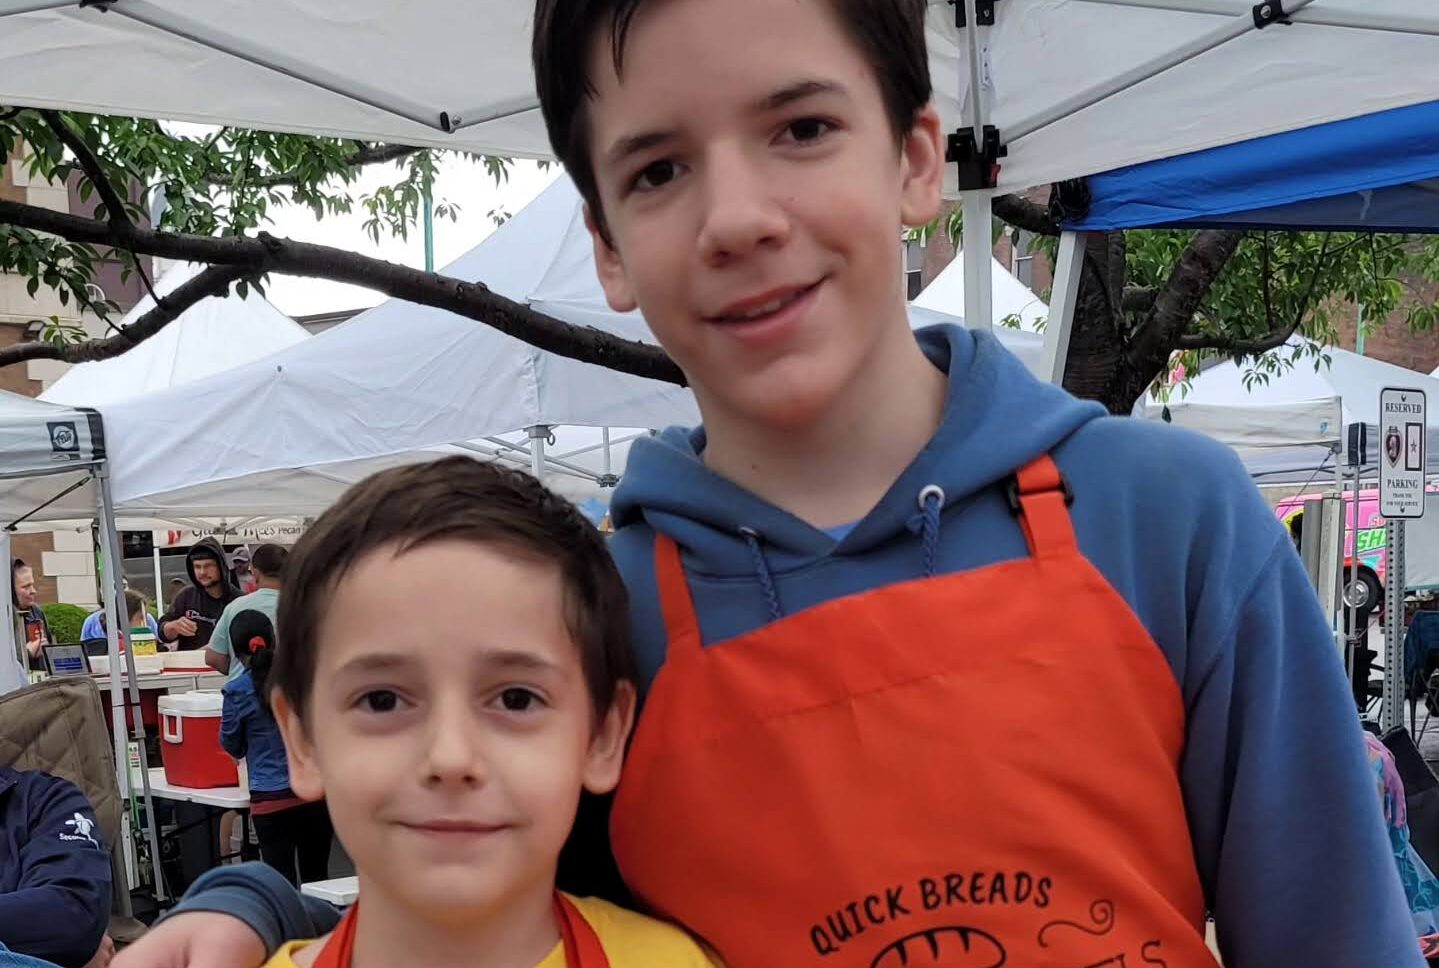 These two brothers, Nathaniel, 13 and Emmitt, 10, together created their business, Sweet Wheels Quick Breads. We caught up with them at the Clarksville, TN market and asked them some questions.